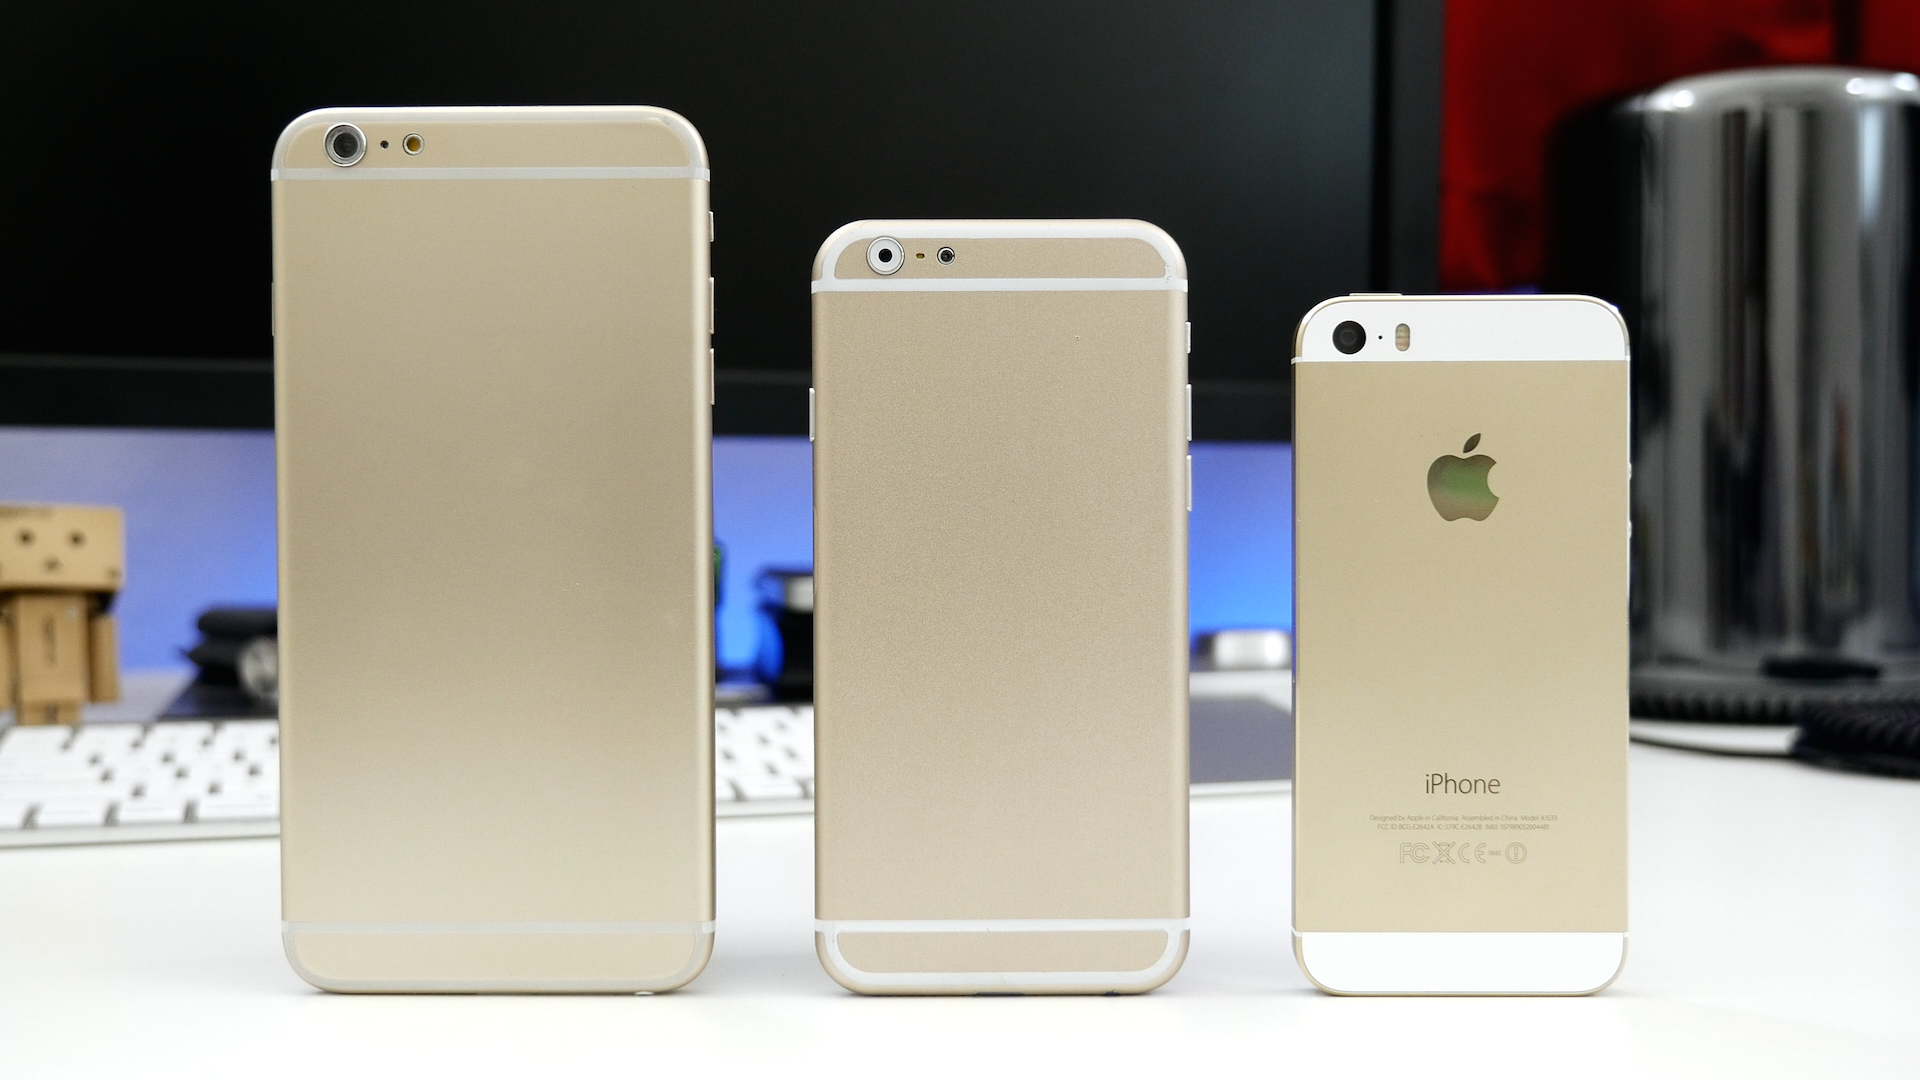 5 5 Inch Iphone 6 Mockup Compared To Iphone 5s And Other Android Phablets Video 9to5mac